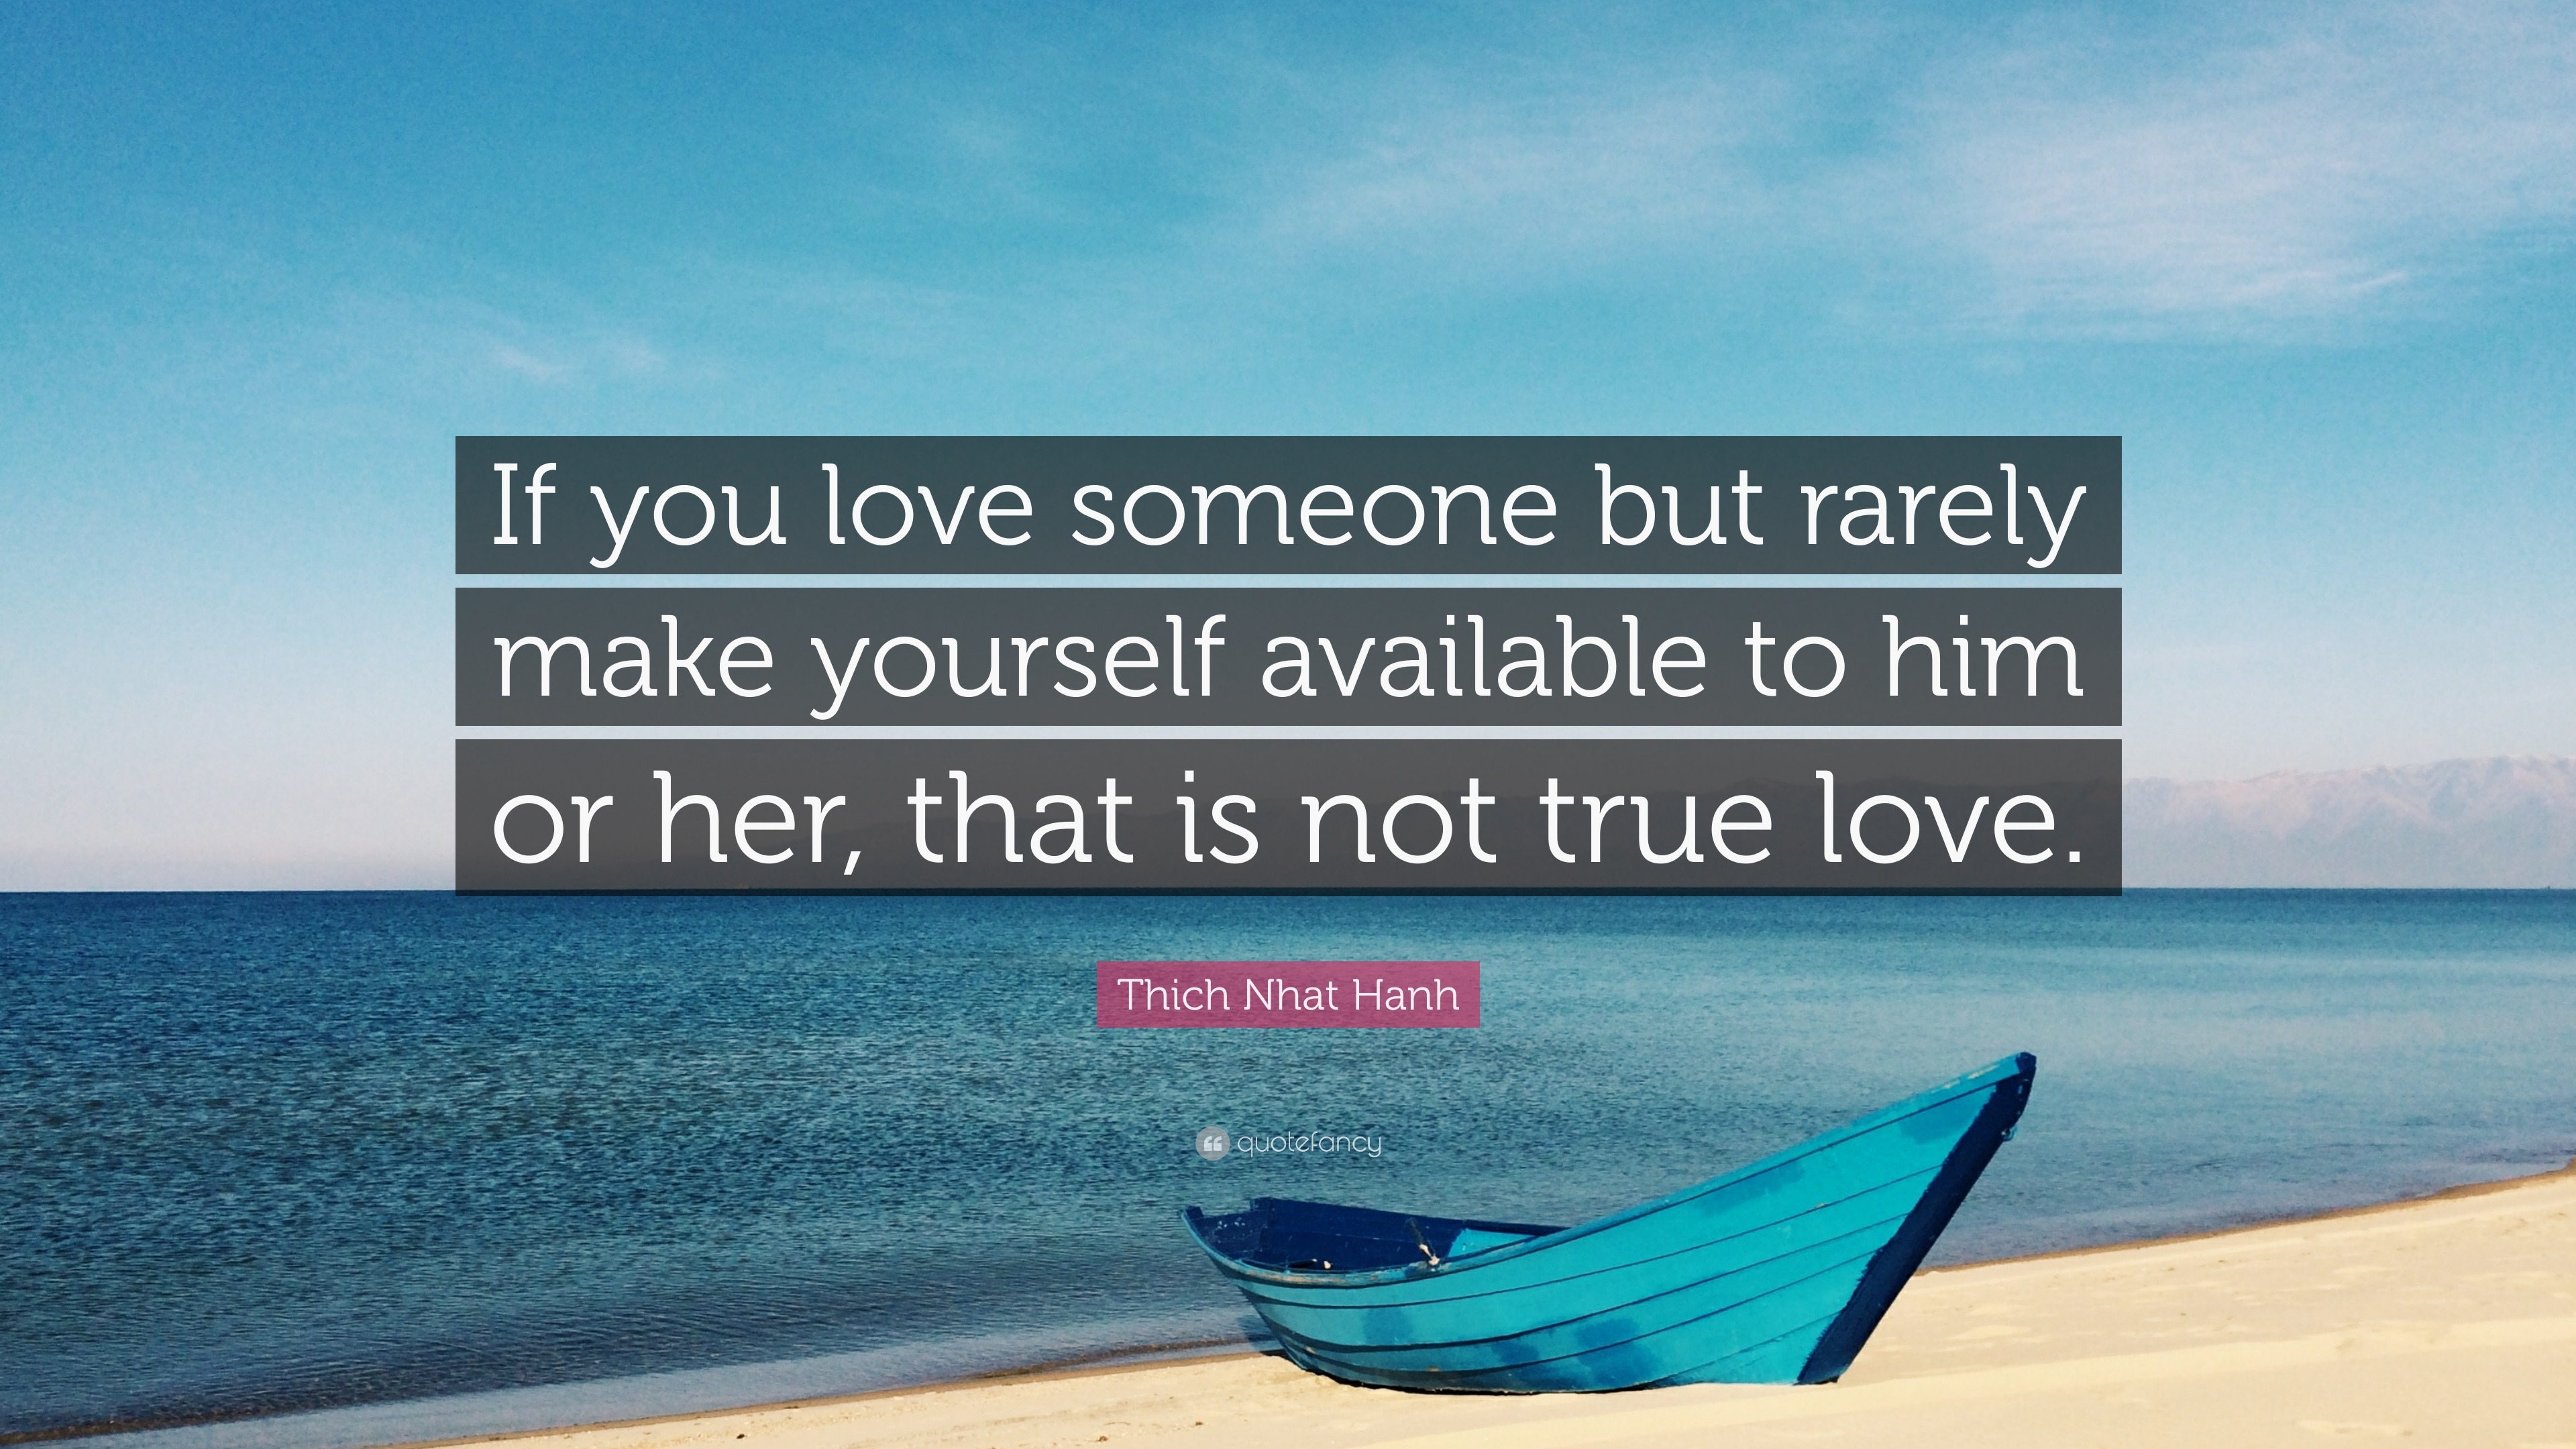 Thich Nhat Hanh Quote “If you love someone but rarely make yourself available to